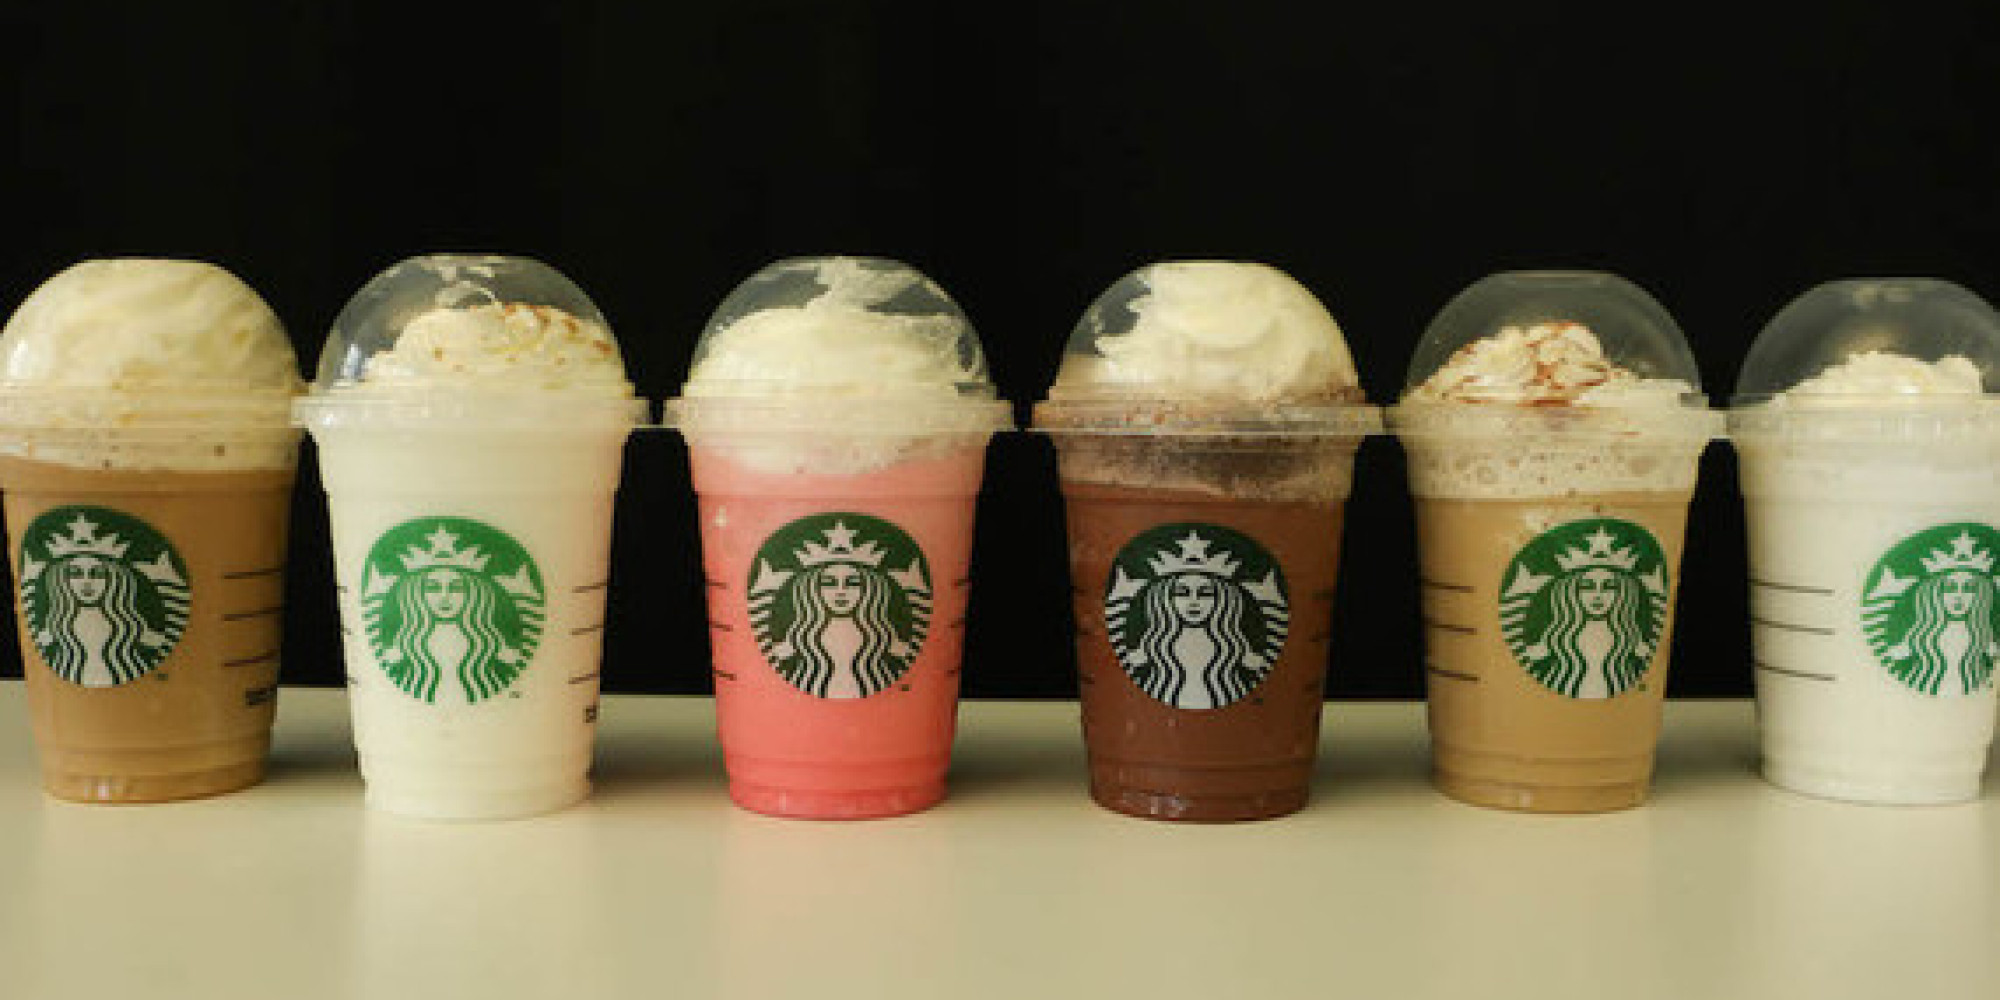 The Definitive Ranking Of Starbucks 6 New Frappuccino Flavors HuffPost.